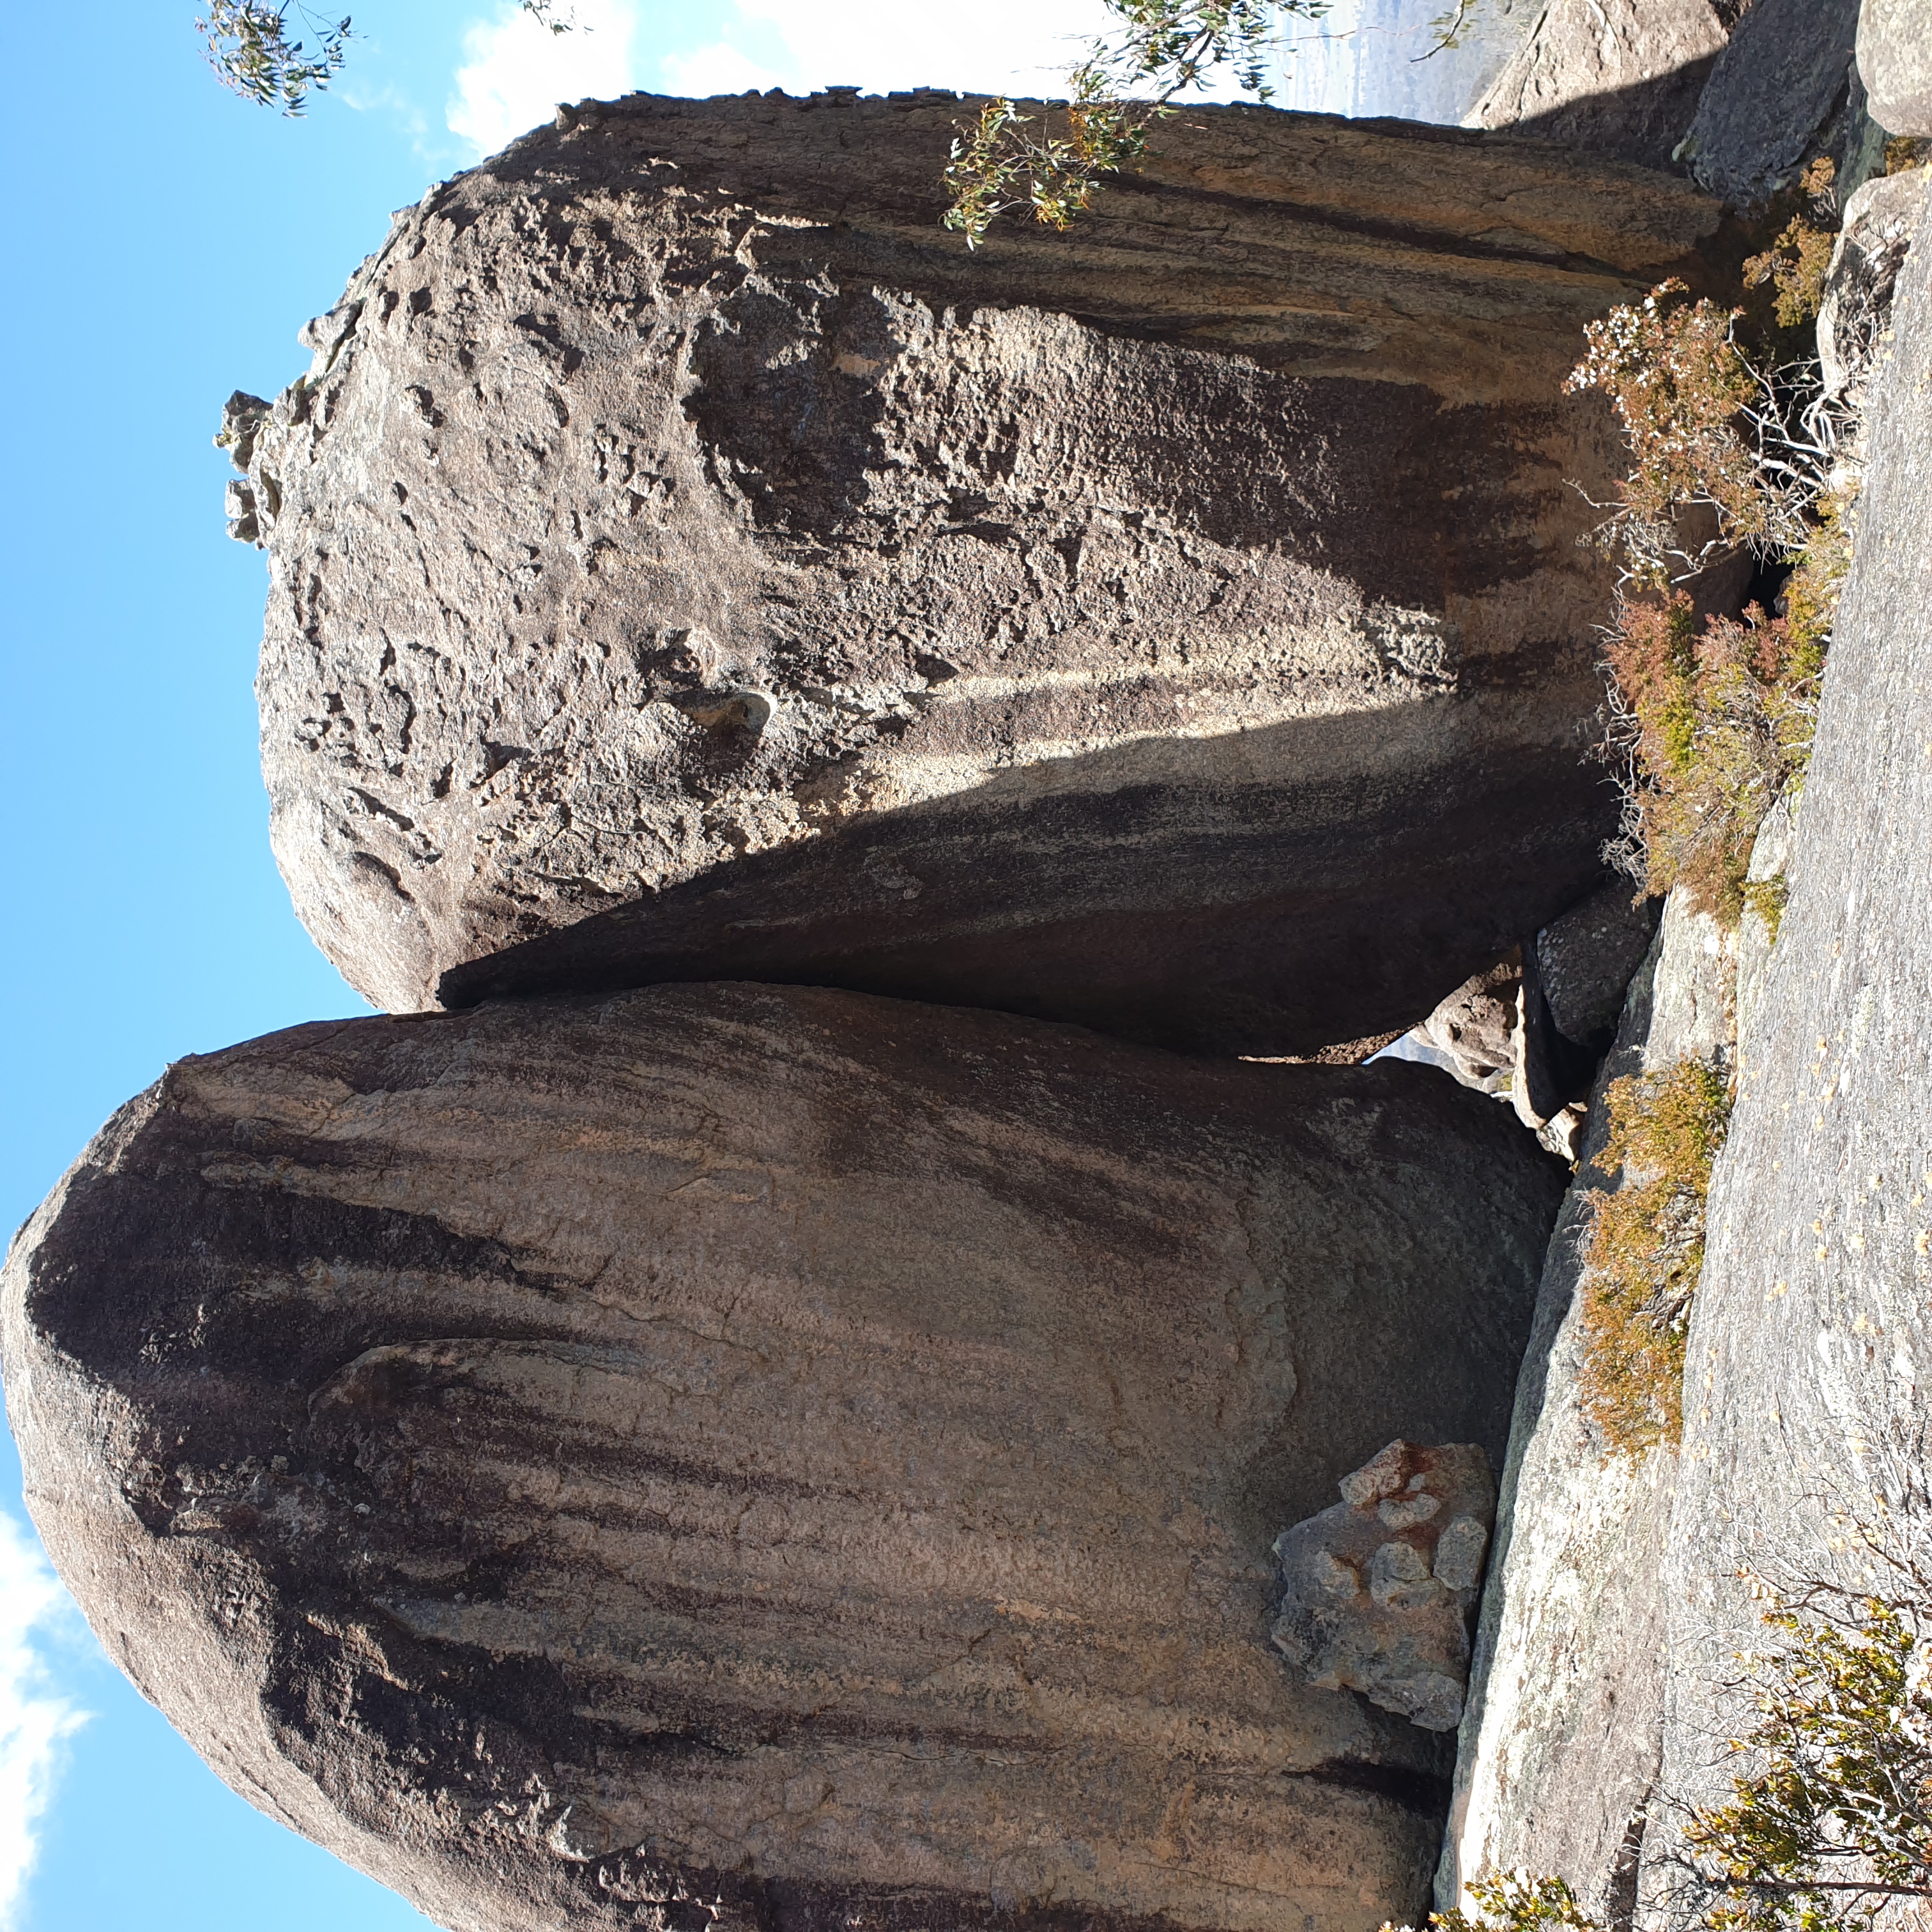 Exploring the massive granite boulders  of the Snowy Range was a highlight of this wilderness